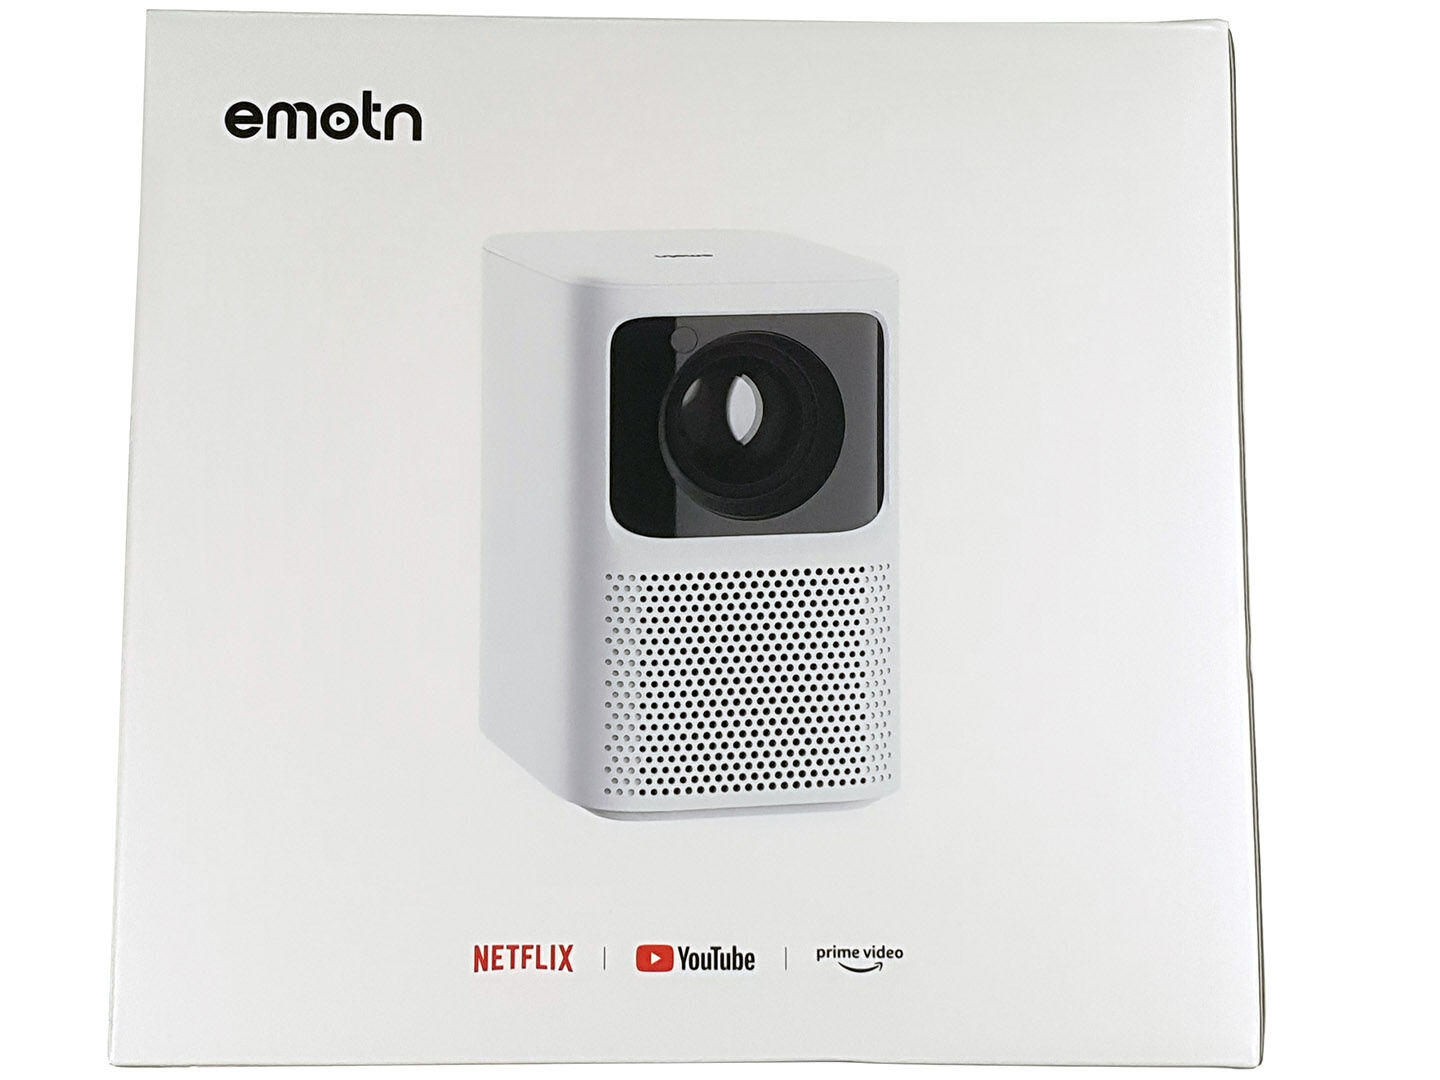 Bluetooth Projector, Emotn N1 Netflix Officially-Licensed Smart Projector,  Native 1080P Movie Projector with 5G Wi-Fi and Bluetooth 5.0, Autofocus